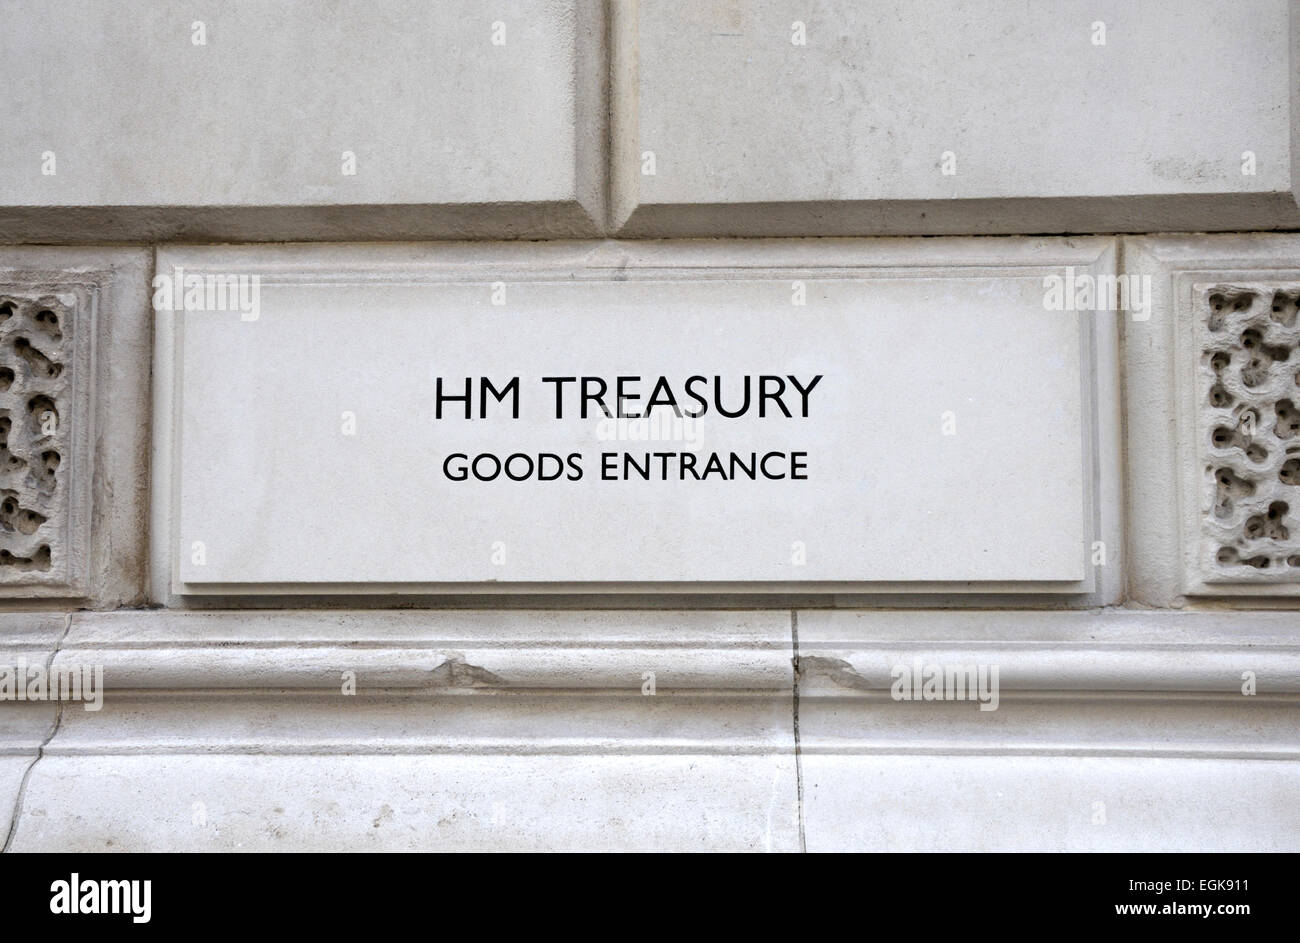 London, England, UK. HM Treasury Goods Entrance sign on the wall in King Charles Street, Westminster Stock Photo